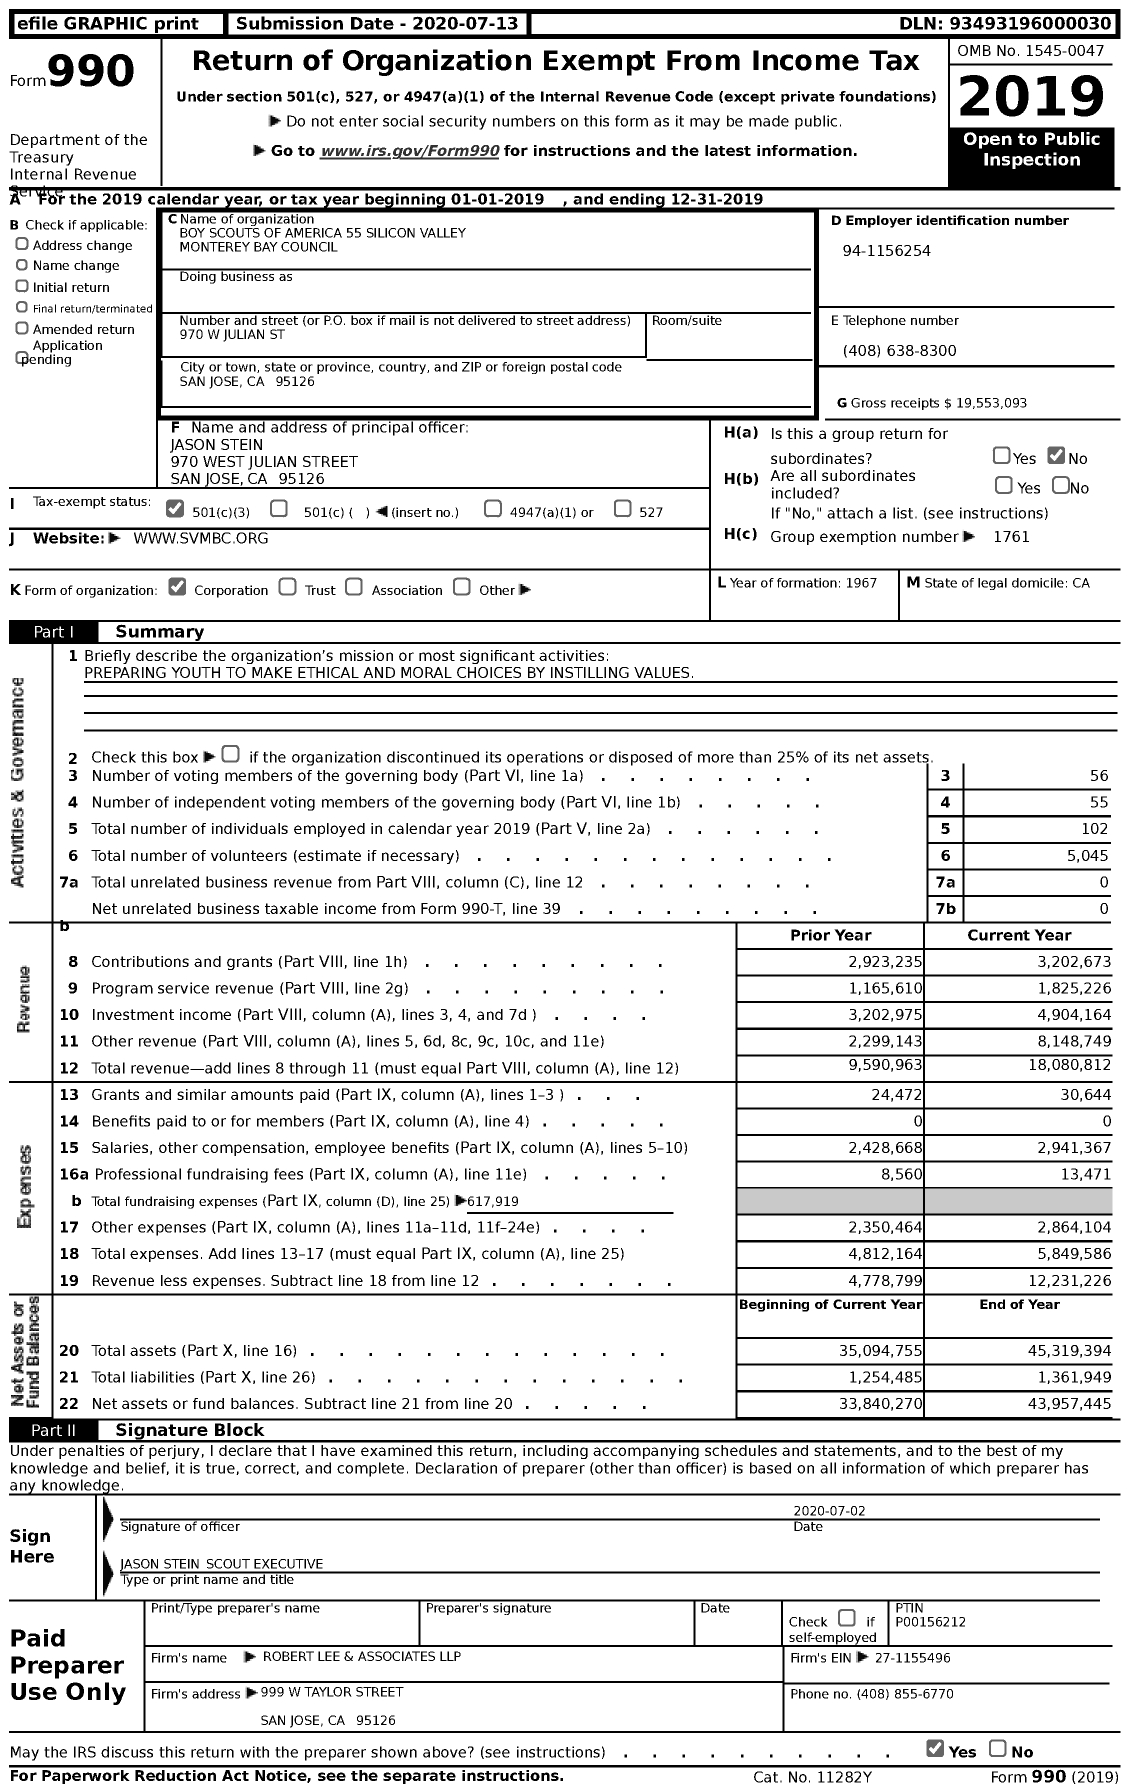 Image of first page of 2019 Form 990 for Silicon Valley Monterey Bay Council (SVMBC)